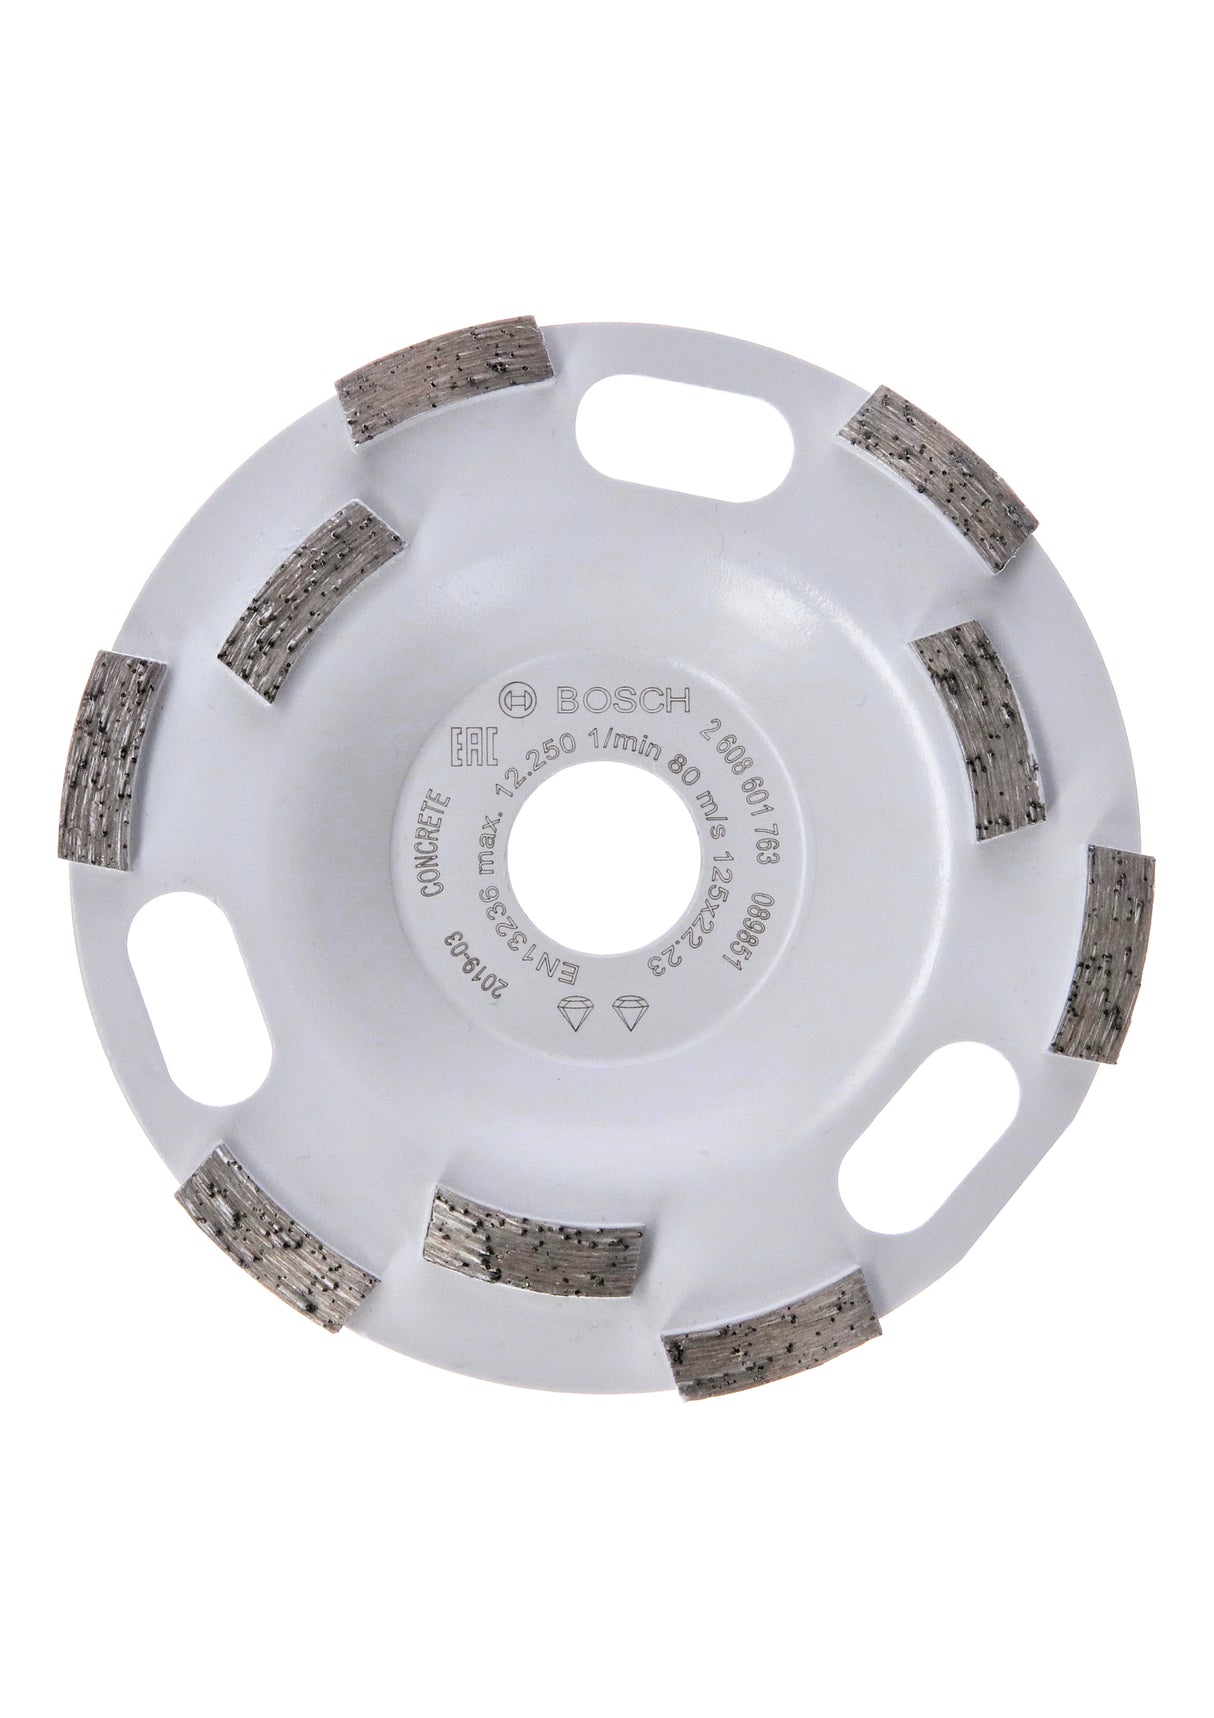 Bosch Professional Double Row Diamond Grinding Head for Concrete - High Speed, 125 x 22.23 x 5 mm Expert